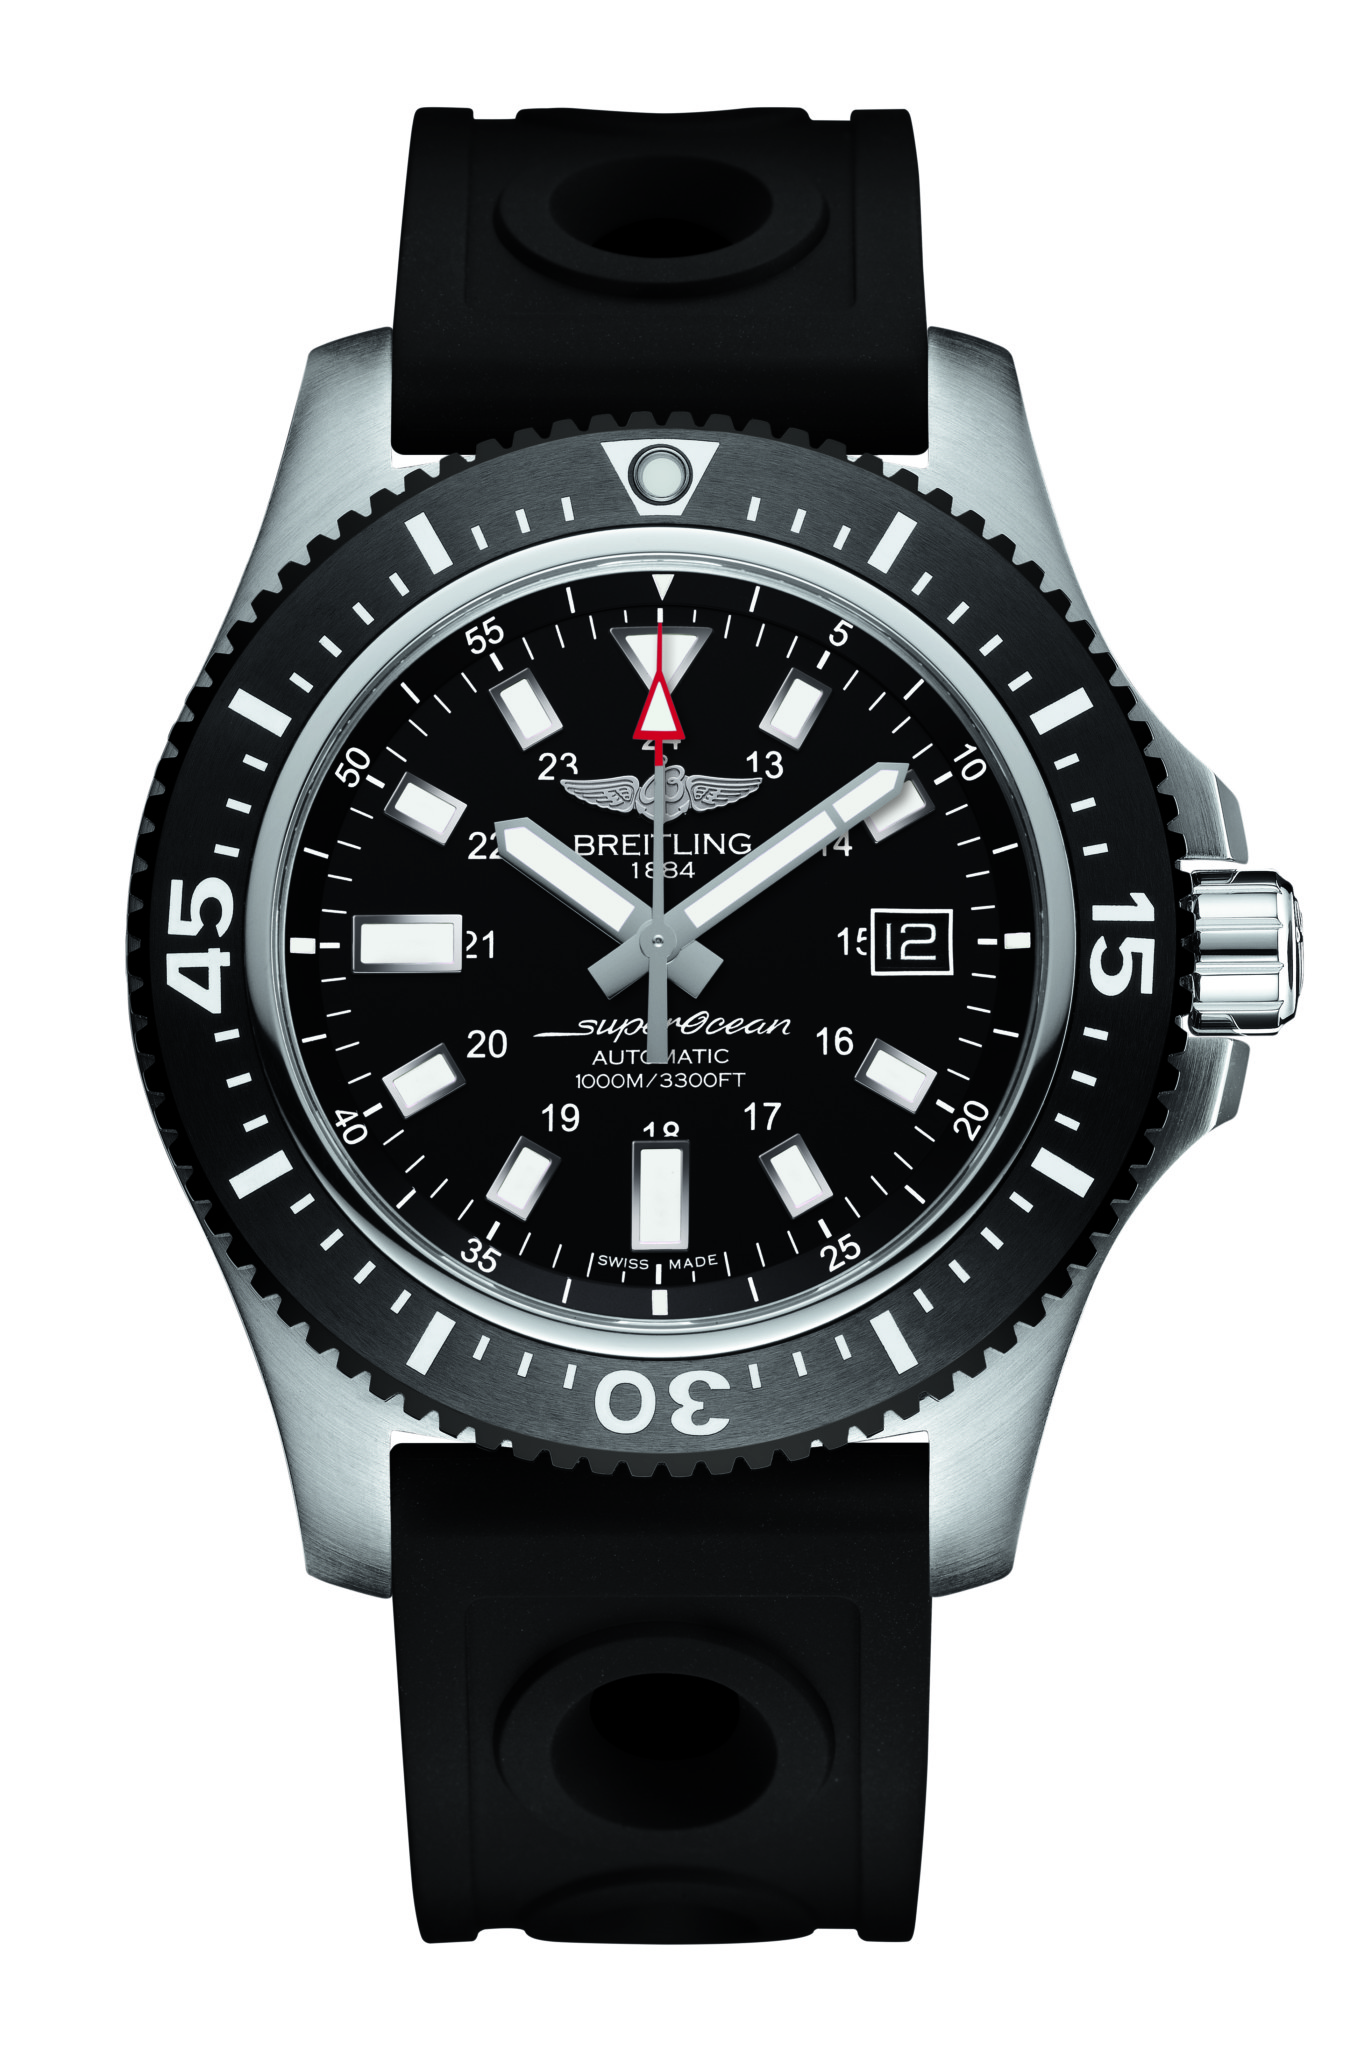 Breitling Takes Superocean Divers' Watch To New Depths